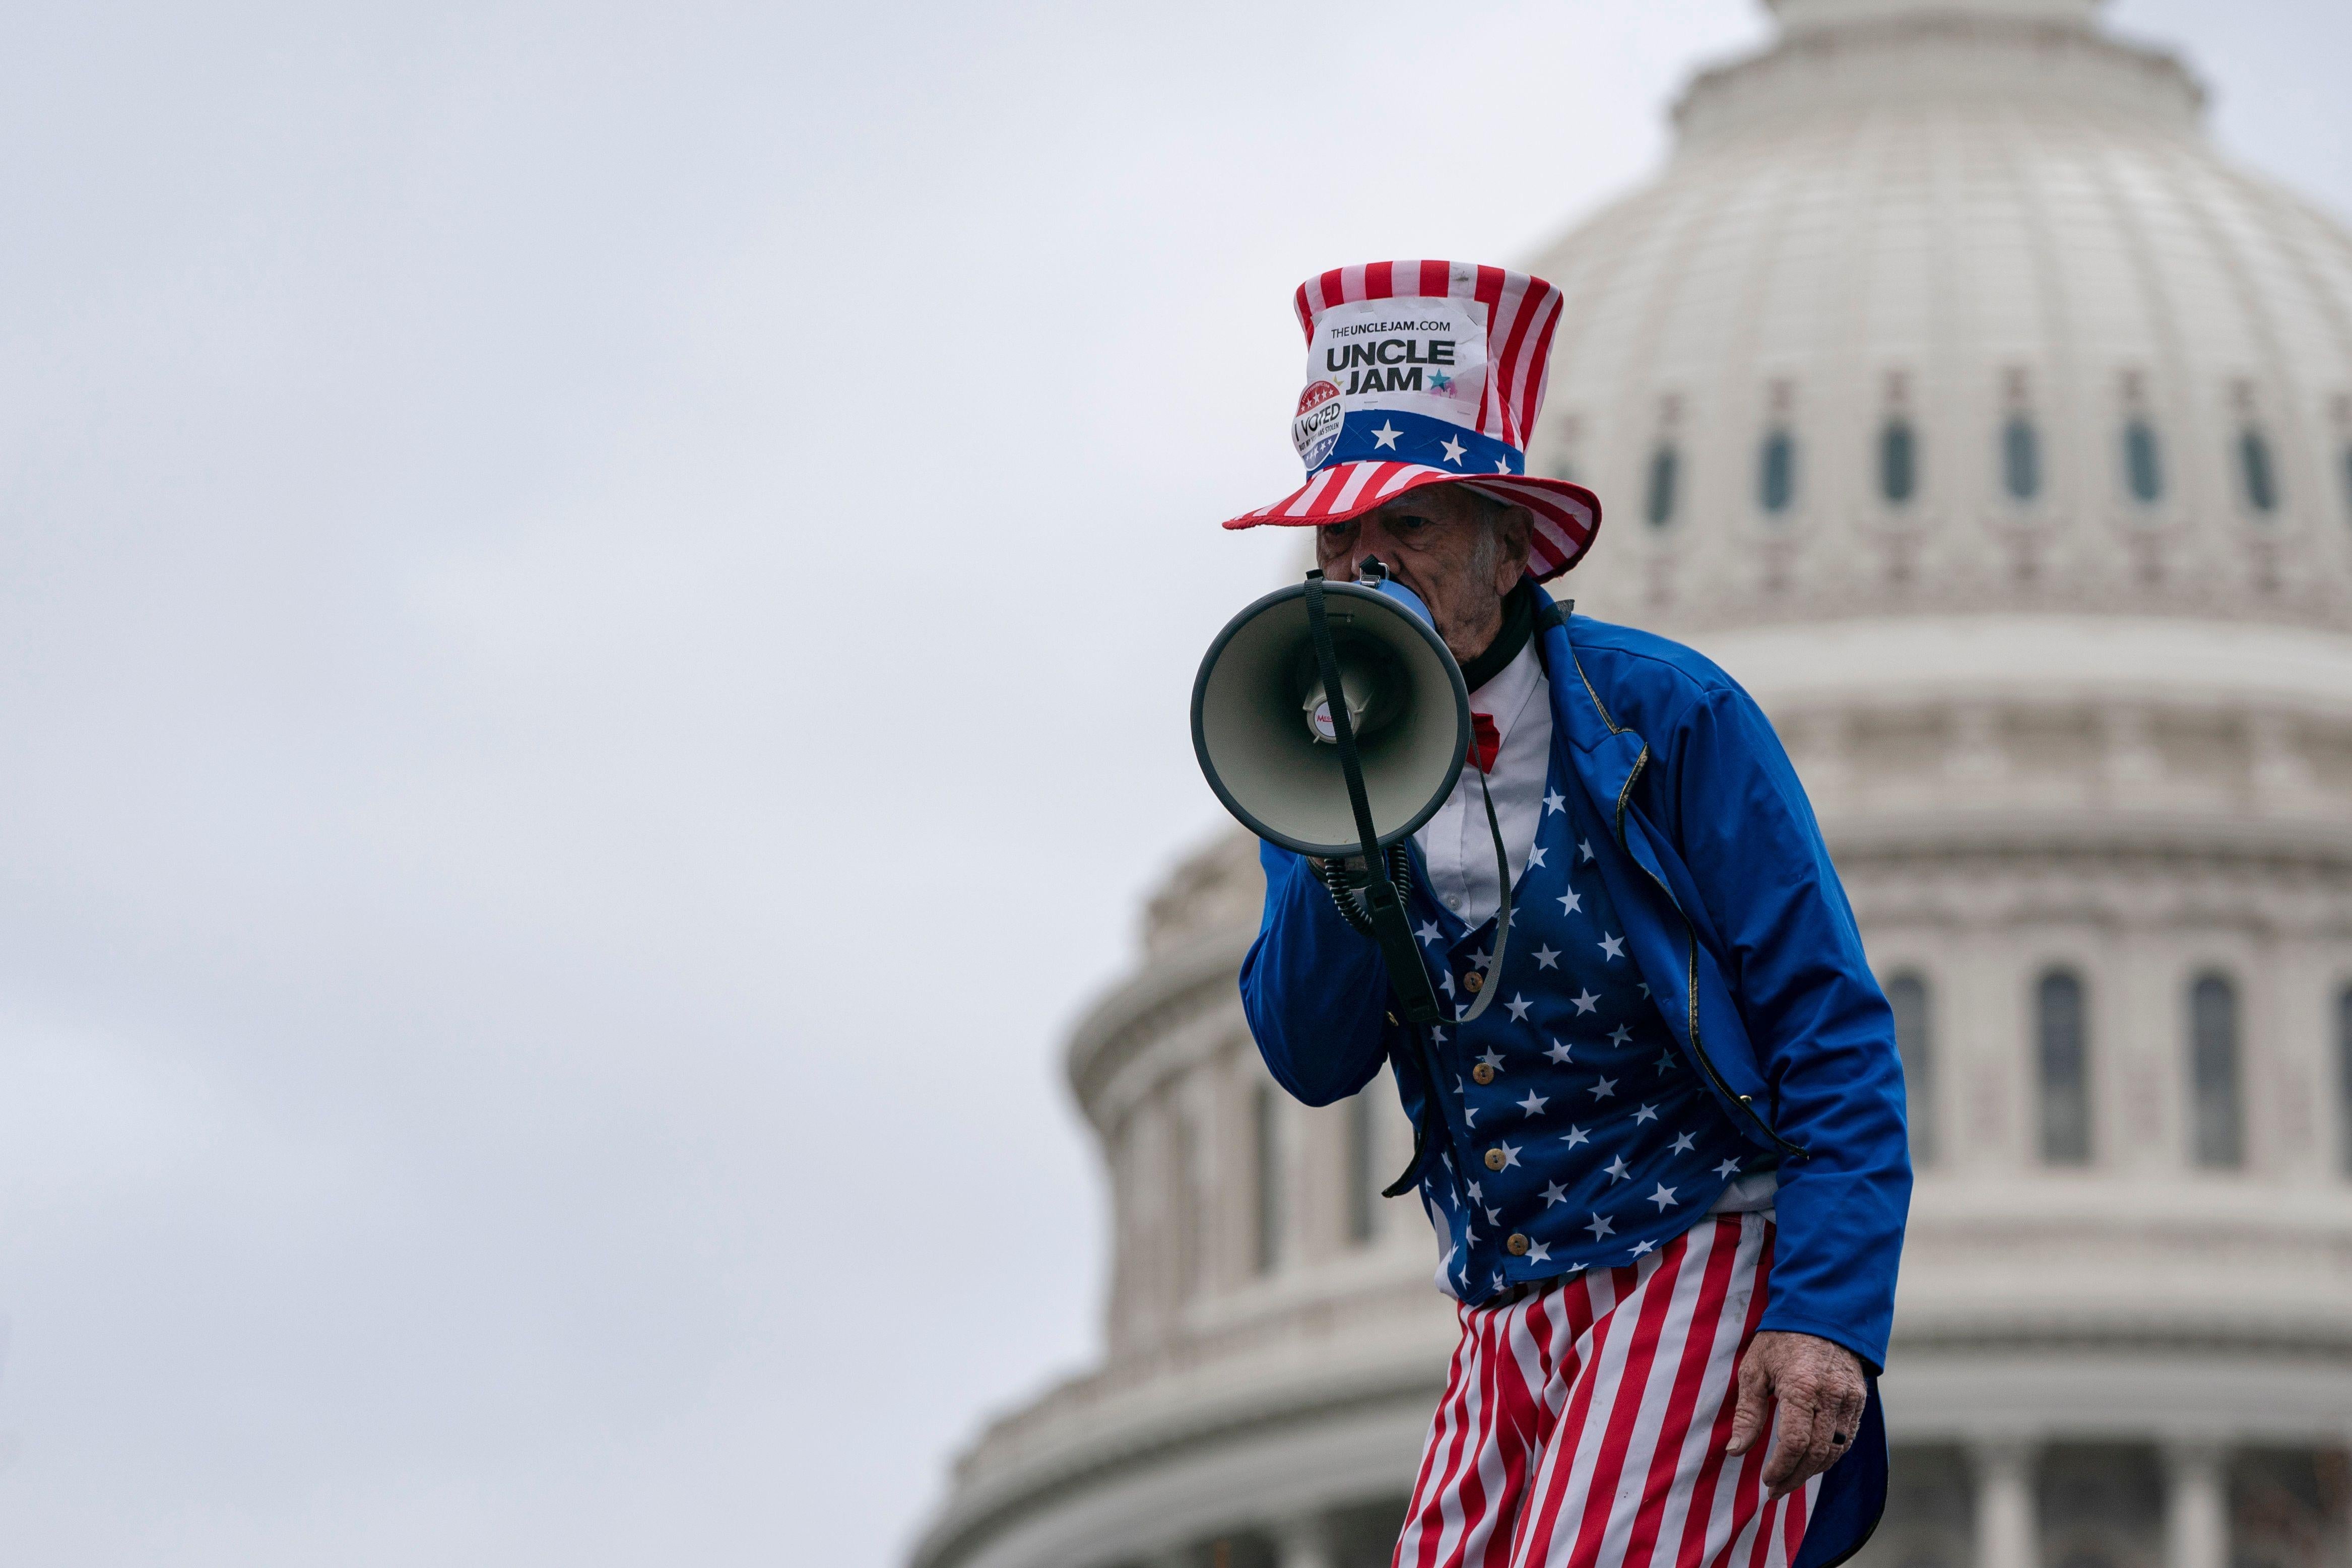 A man in an Uncle Sam costume speaks into a megaphone outside the U.S. Capitol.